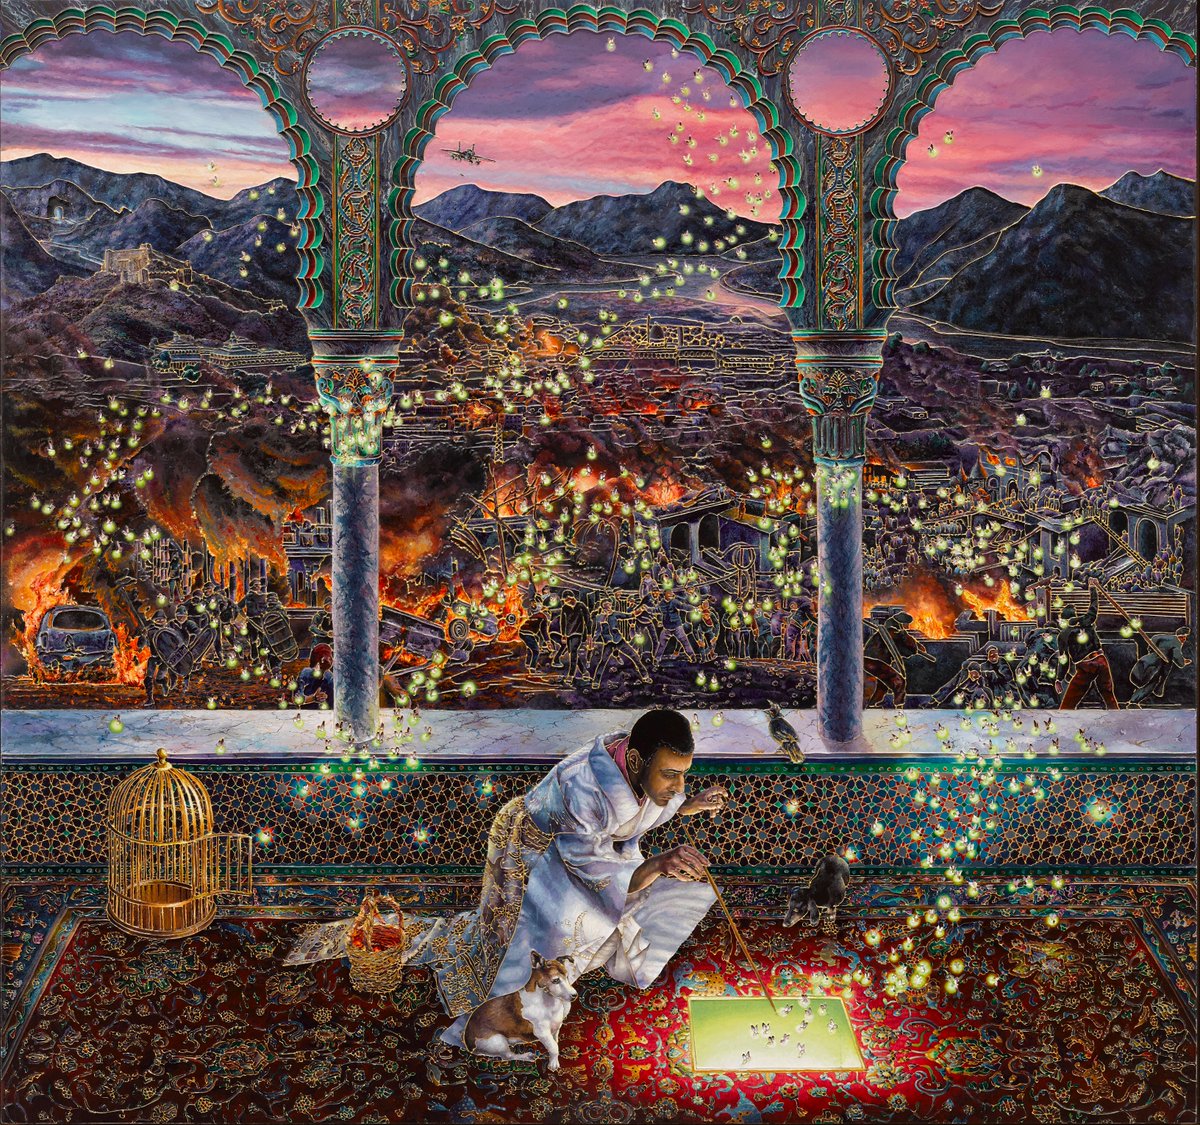 “Raqib Shaw: Ballads of East and West” invites viewers to embark on a fantastic journey, guided by the artist’s love of world cultures & his acute awareness of present-day realities. 'Ballads of East and West' opens 6/9 & is organized by the @fristartmuseum and @gardnermuseum.